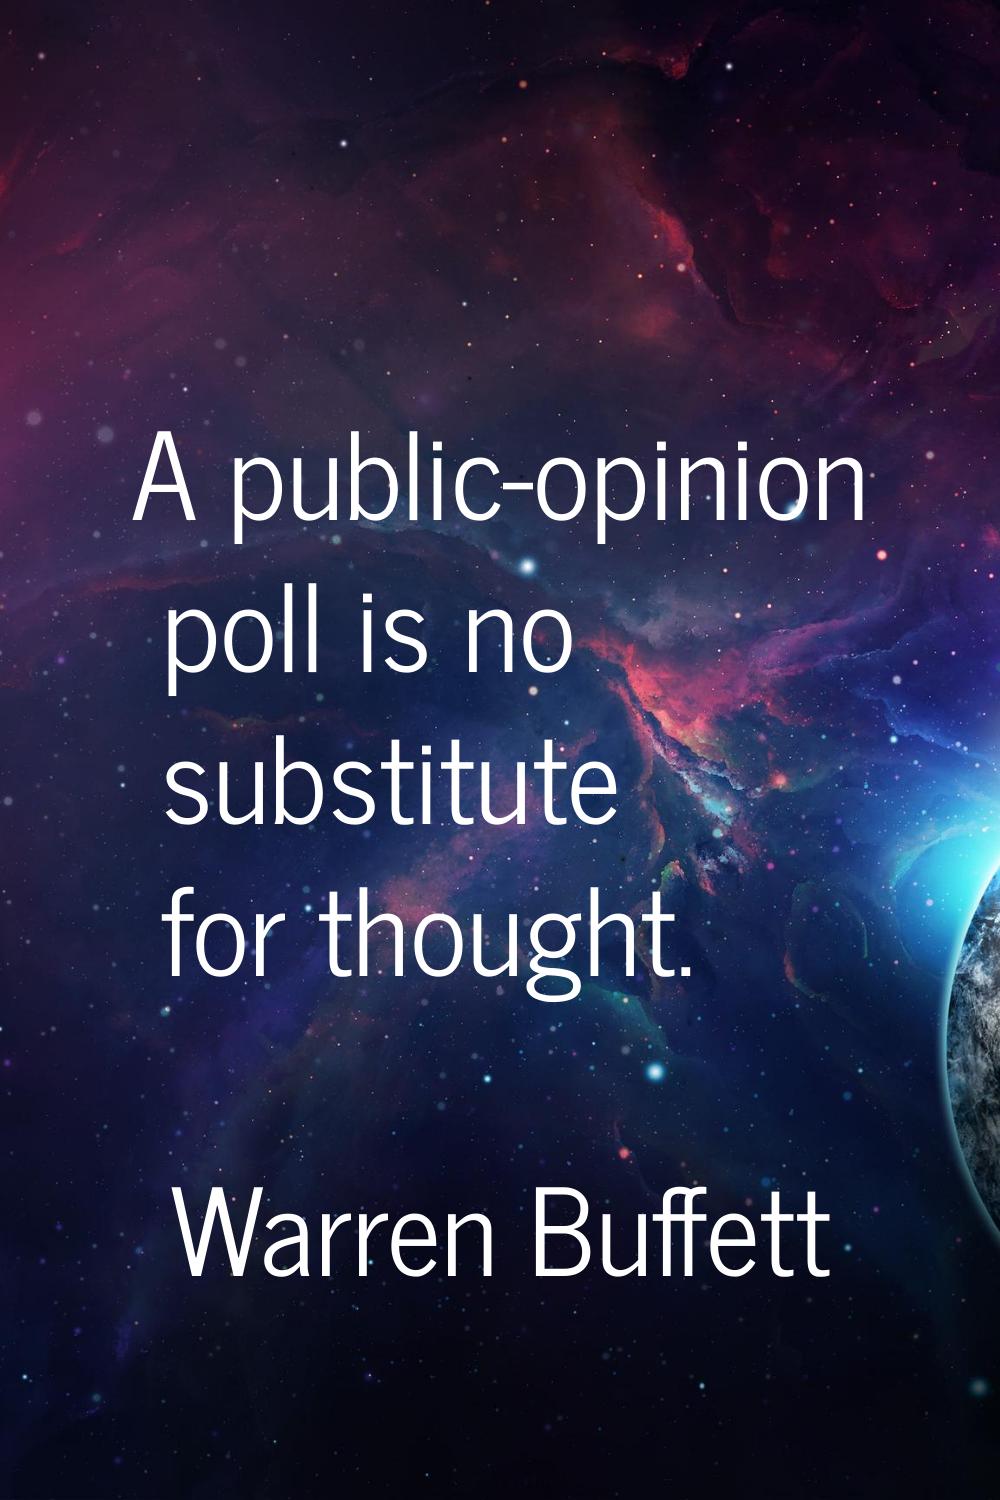 A public-opinion poll is no substitute for thought.